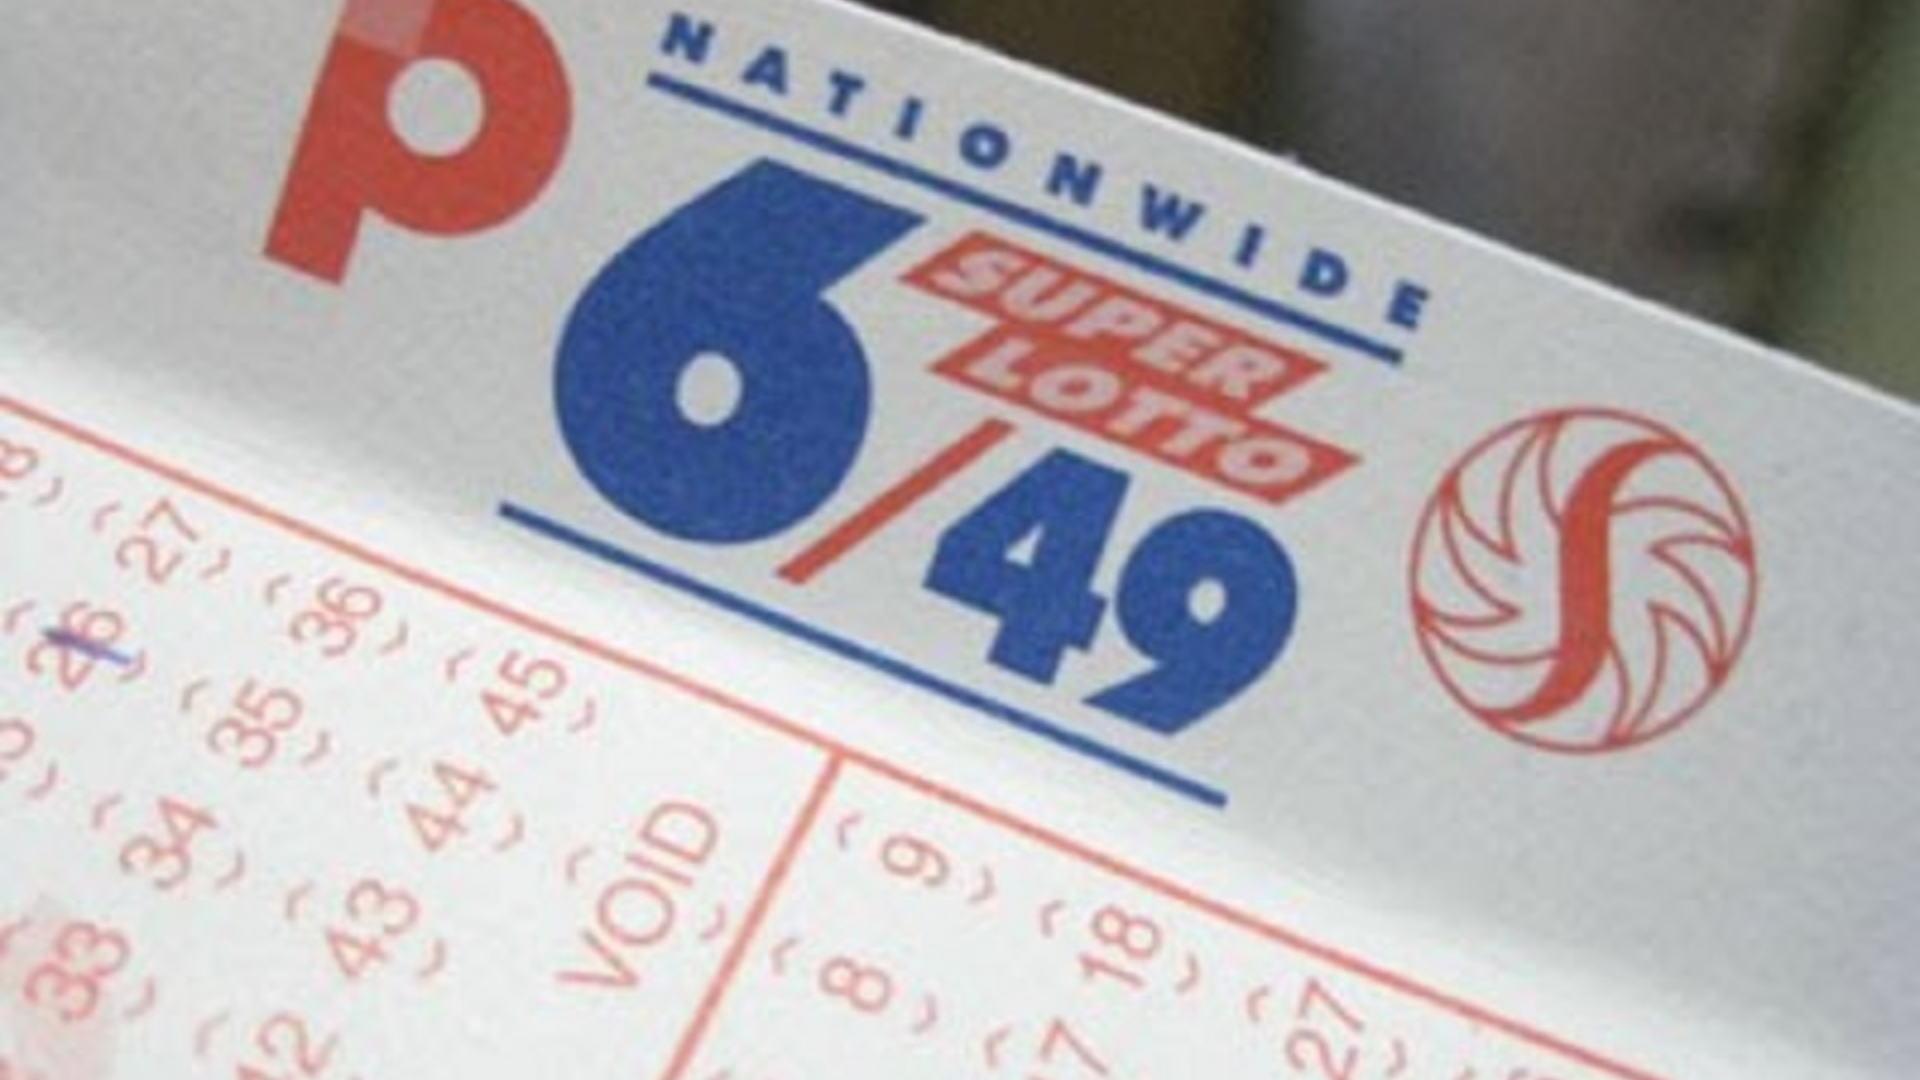 The 6/49 Super Lotto jackpot reward of P640,654,817.60 was won by a fortunate bettor.